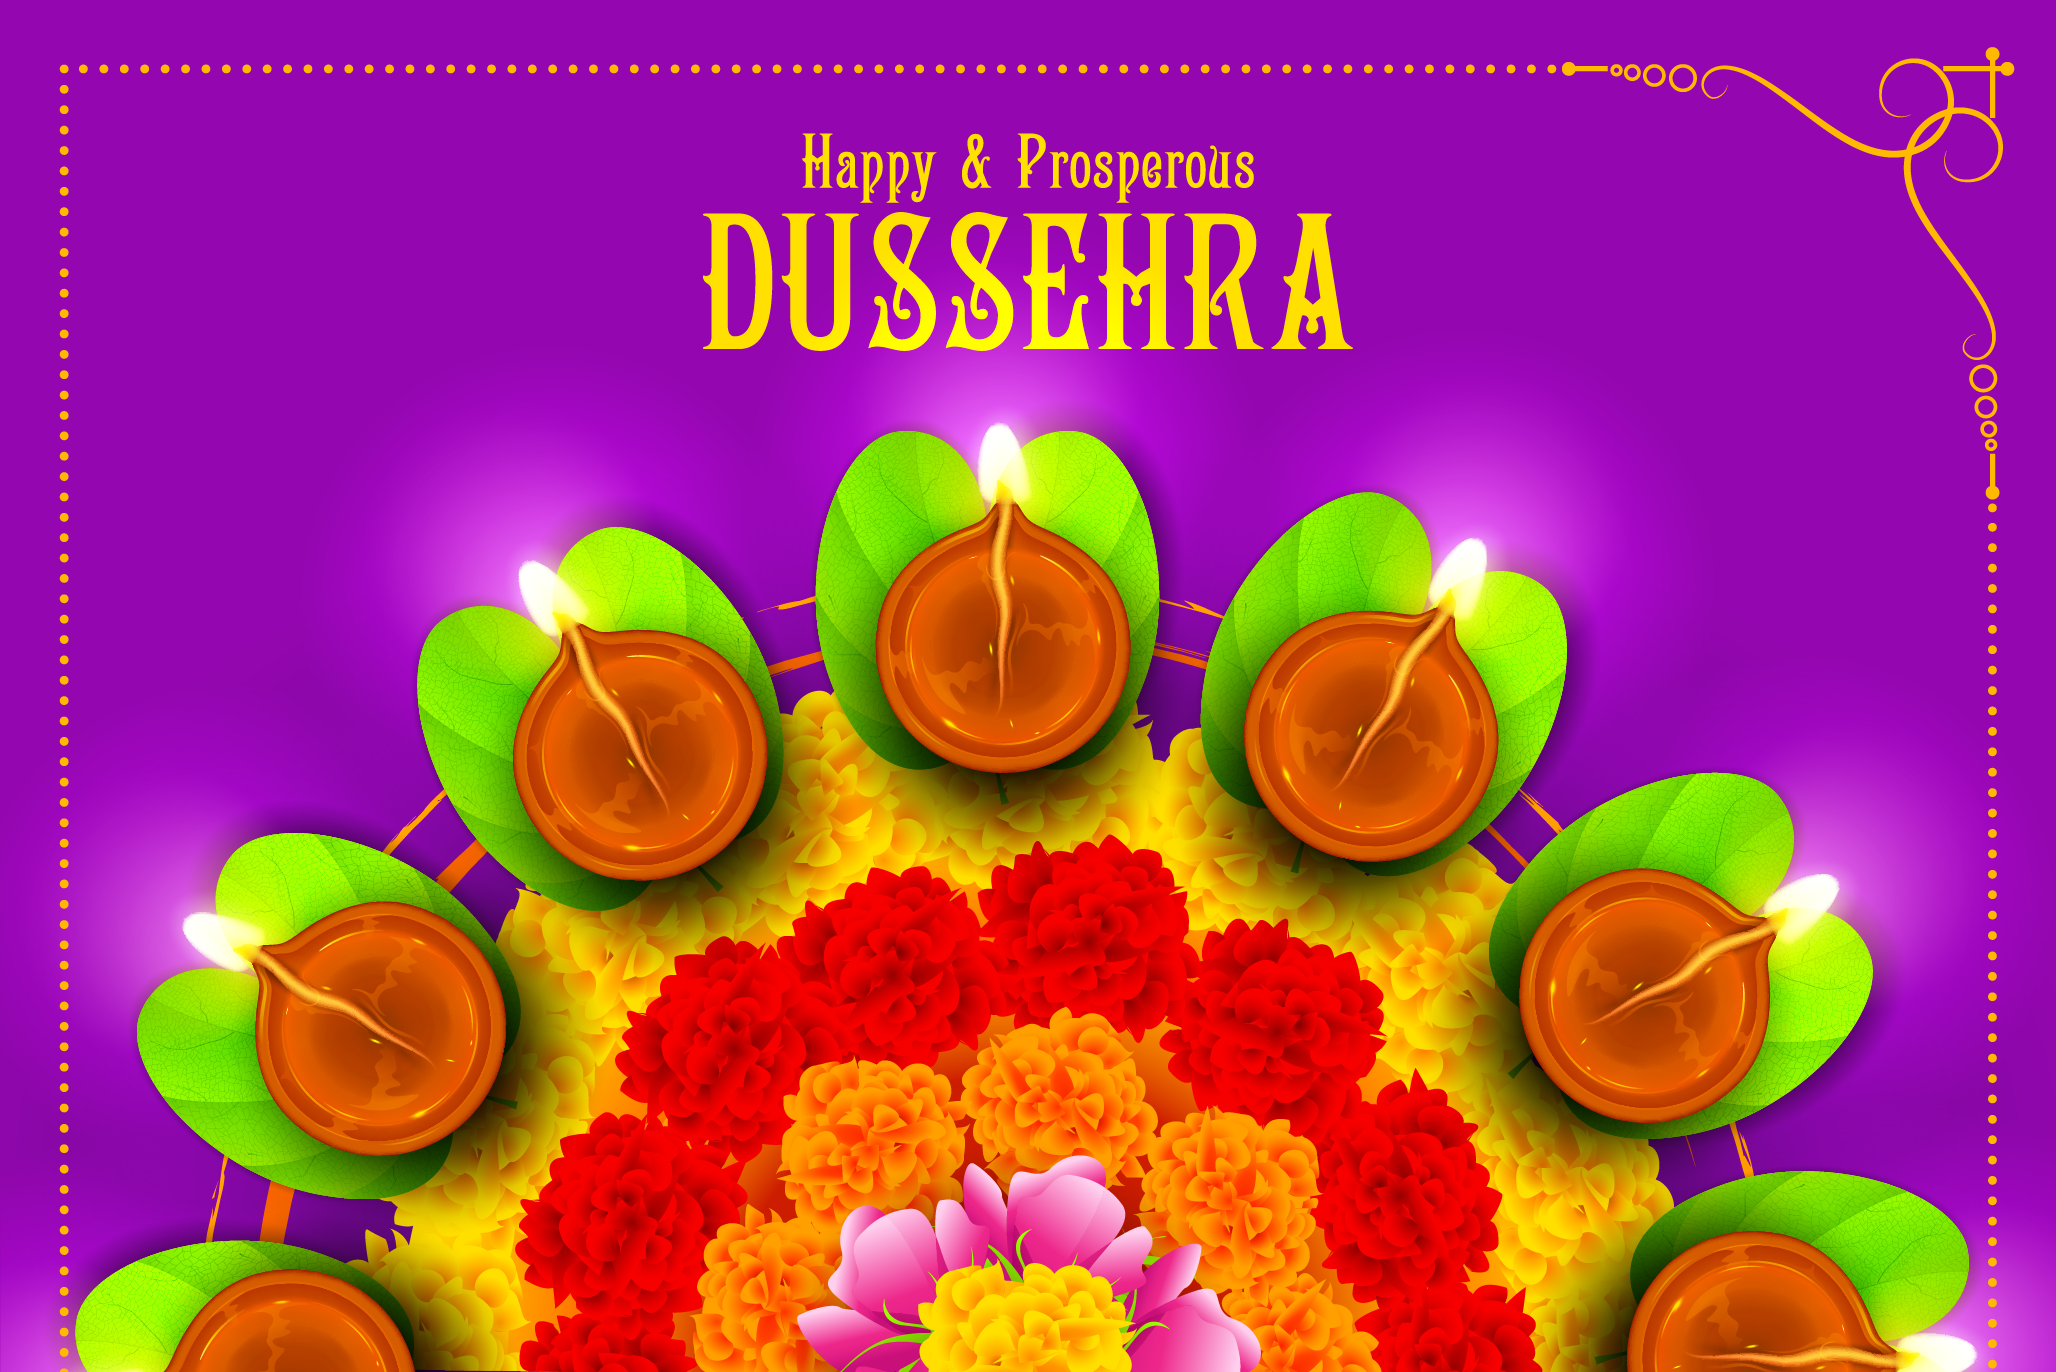 Dussehra: Let the Best Prevail in Your Life | Aviva India Blogs